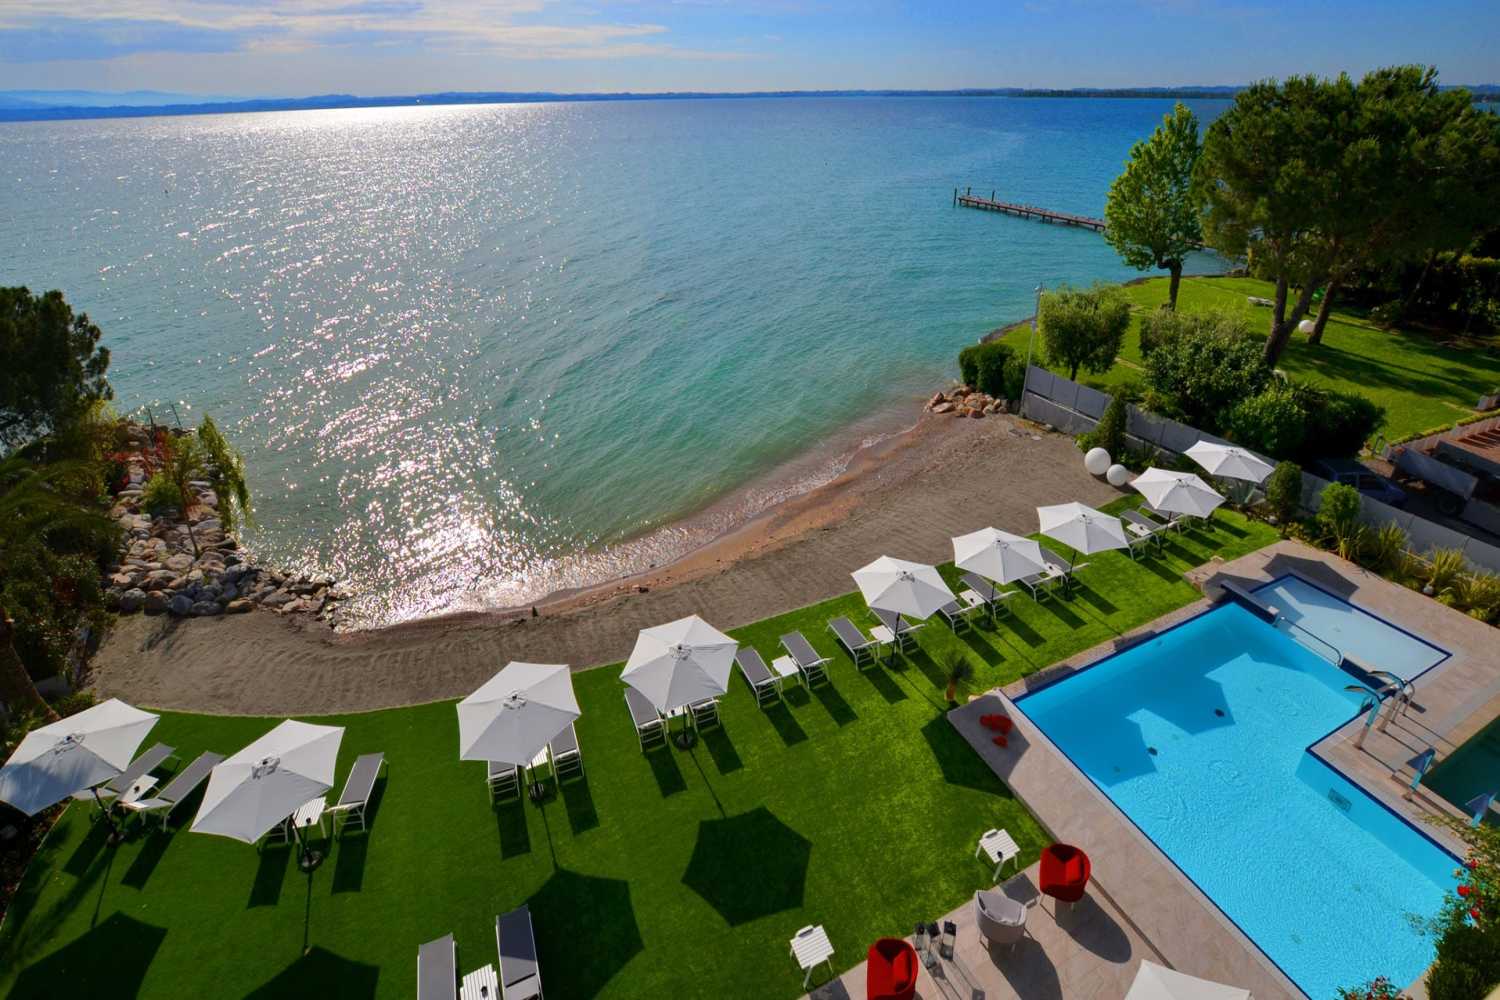 Hotel Ocelle Thermae & Spa Sirmione, Garda Lake - Italy